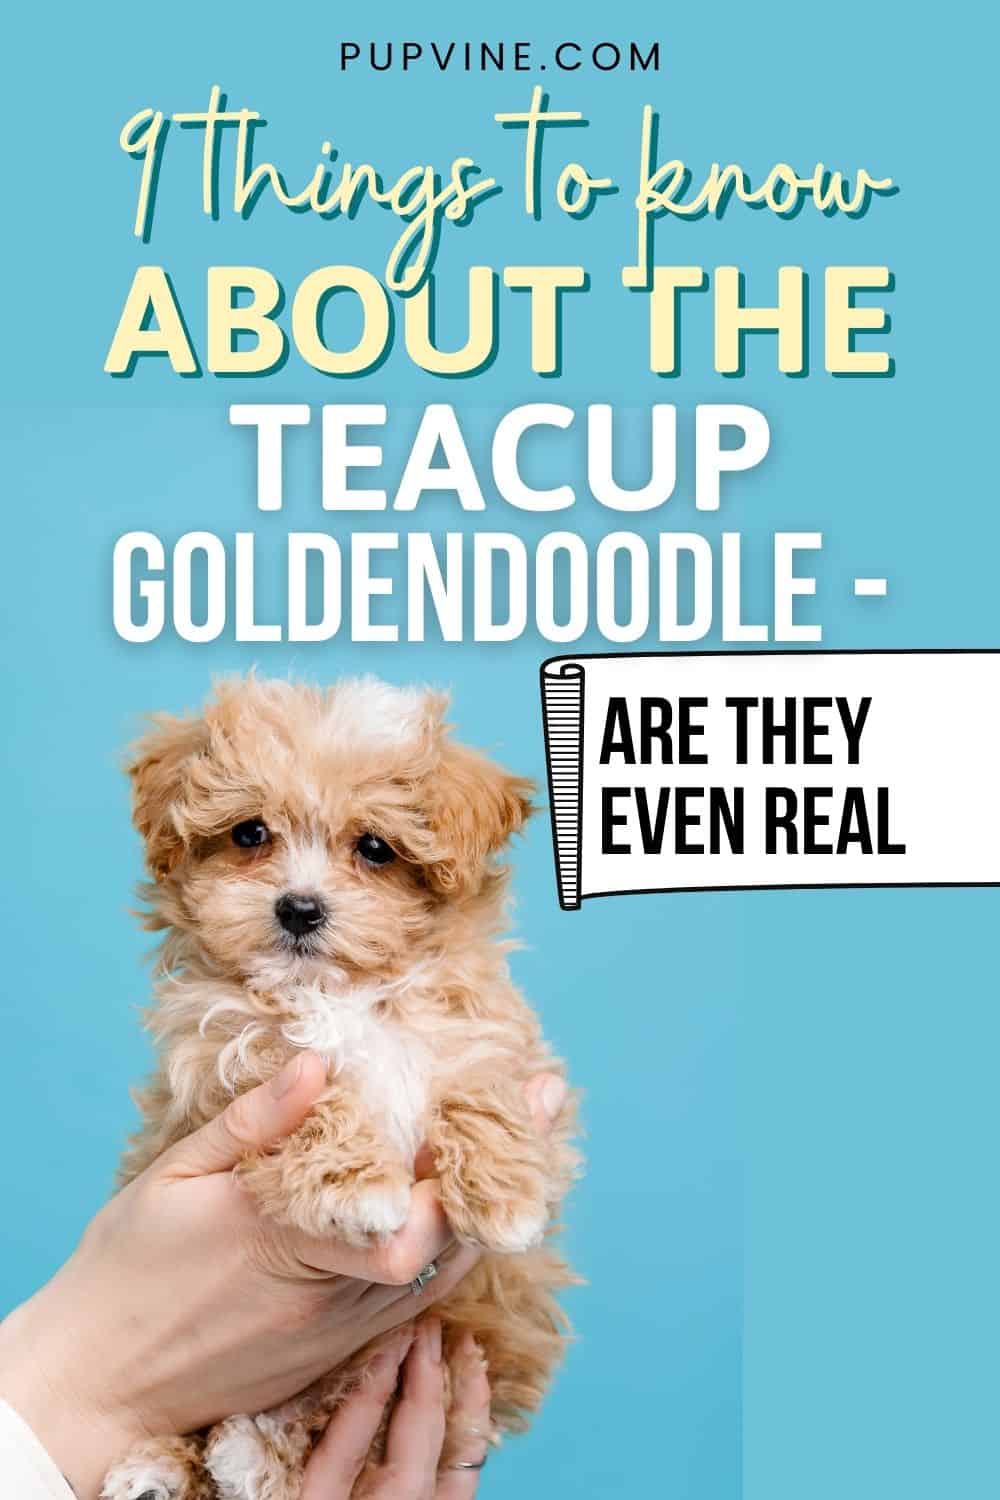 9 Things to Know About A Teacup Goldendoodle – Are They Even Real